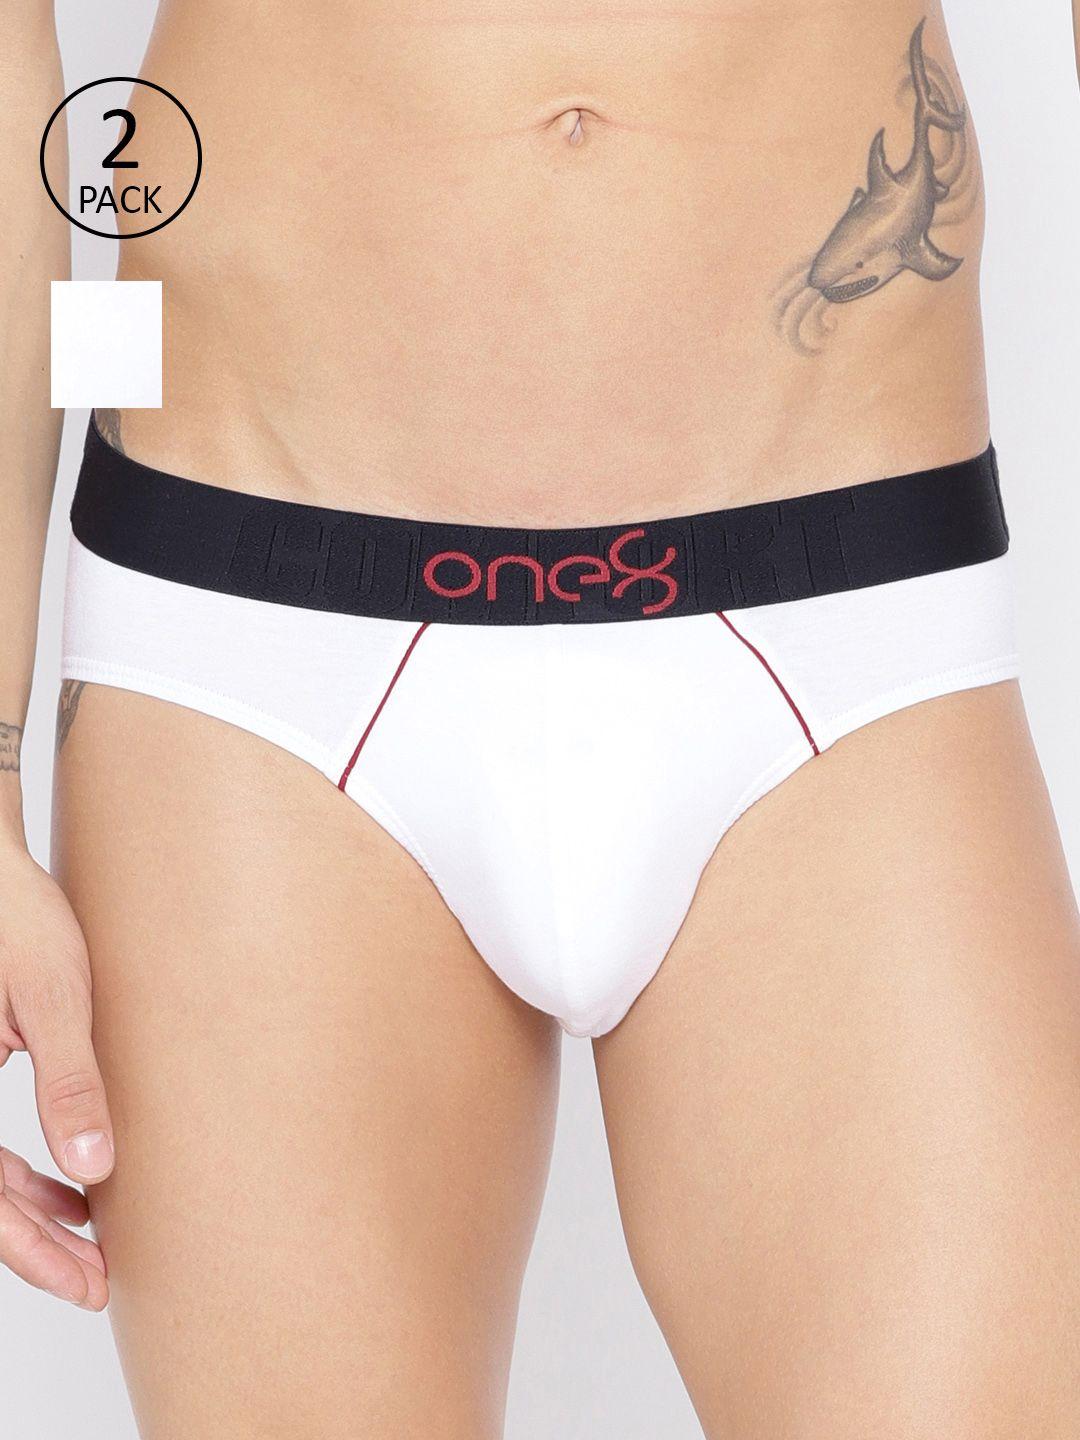 one8-by-virat-kohli-men-pack-of-2-solid-low-rise-briefs